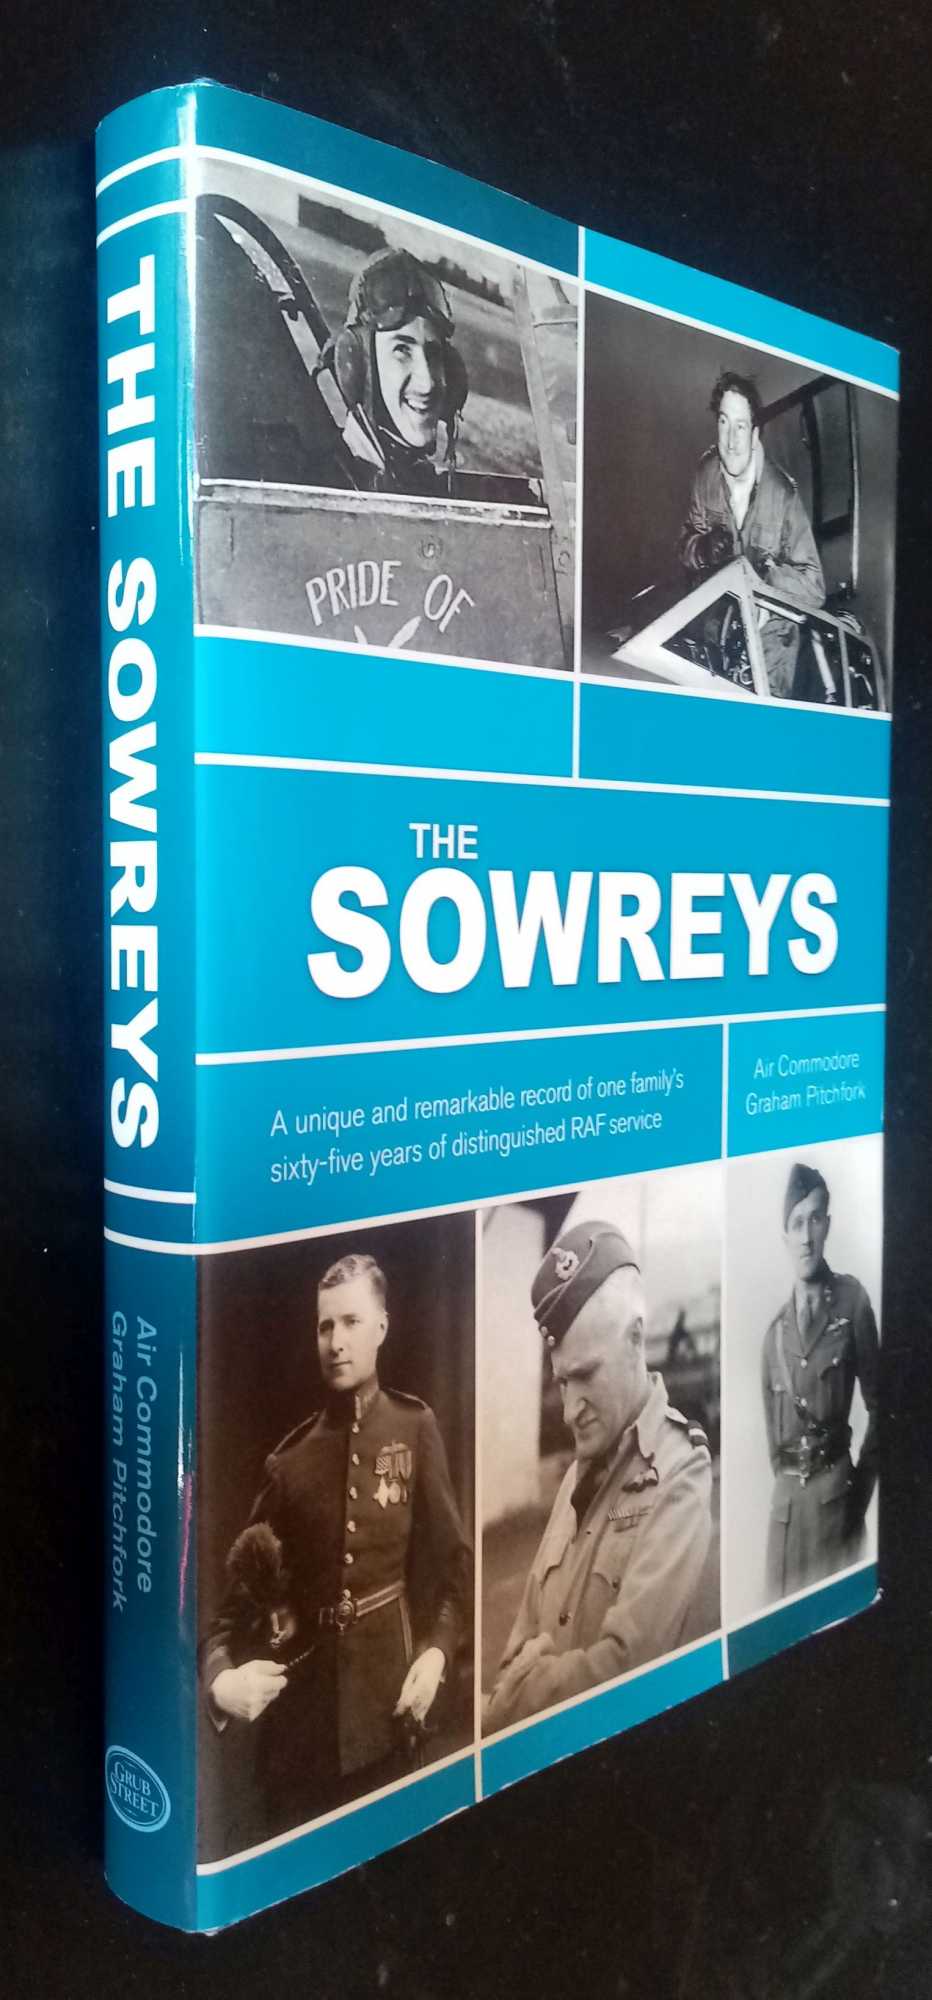 Graham Pitchfork - The Sowreys: A Unique and Remarkable Record of One Family's Sixty-five Years of Distinguished Service    SIGNED  by Freddie Sowrey